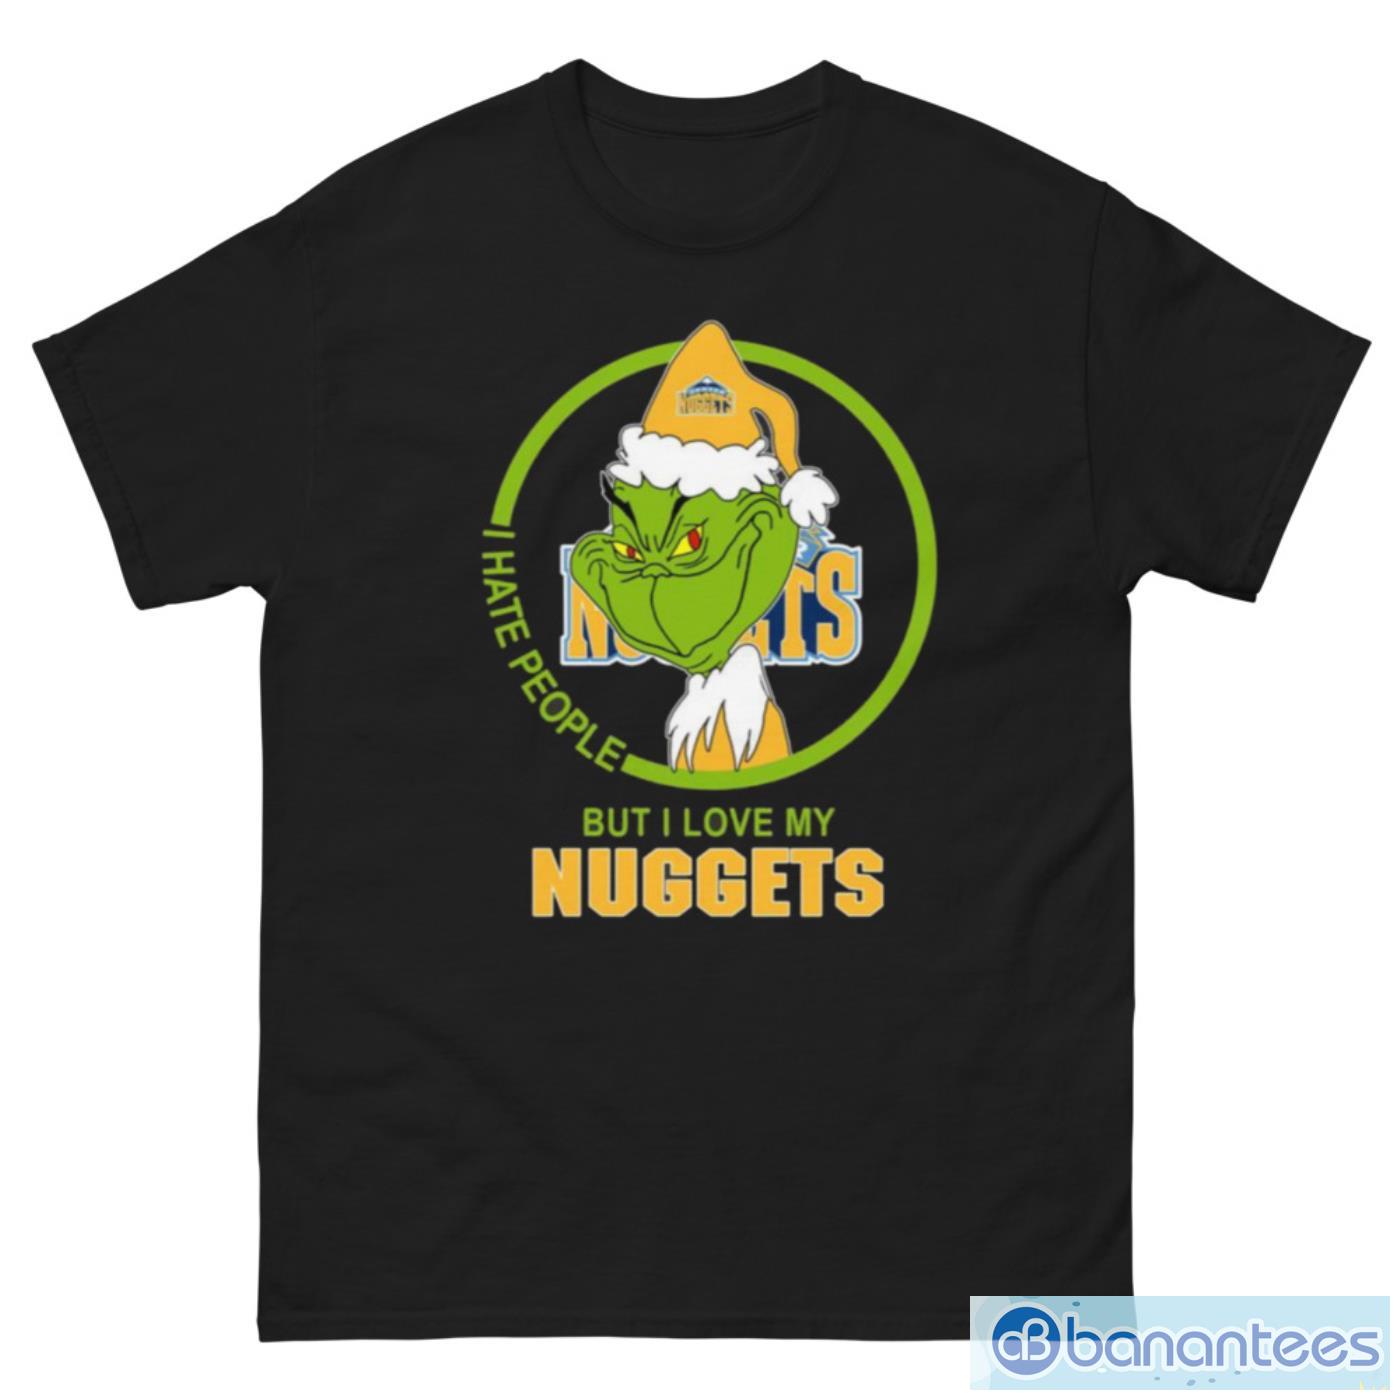 Denver Nuggets NBA Christmas Grinch I Hate People But I Love My Favorite Basketball Team T Shirt - G500 Men’s Classic Tee